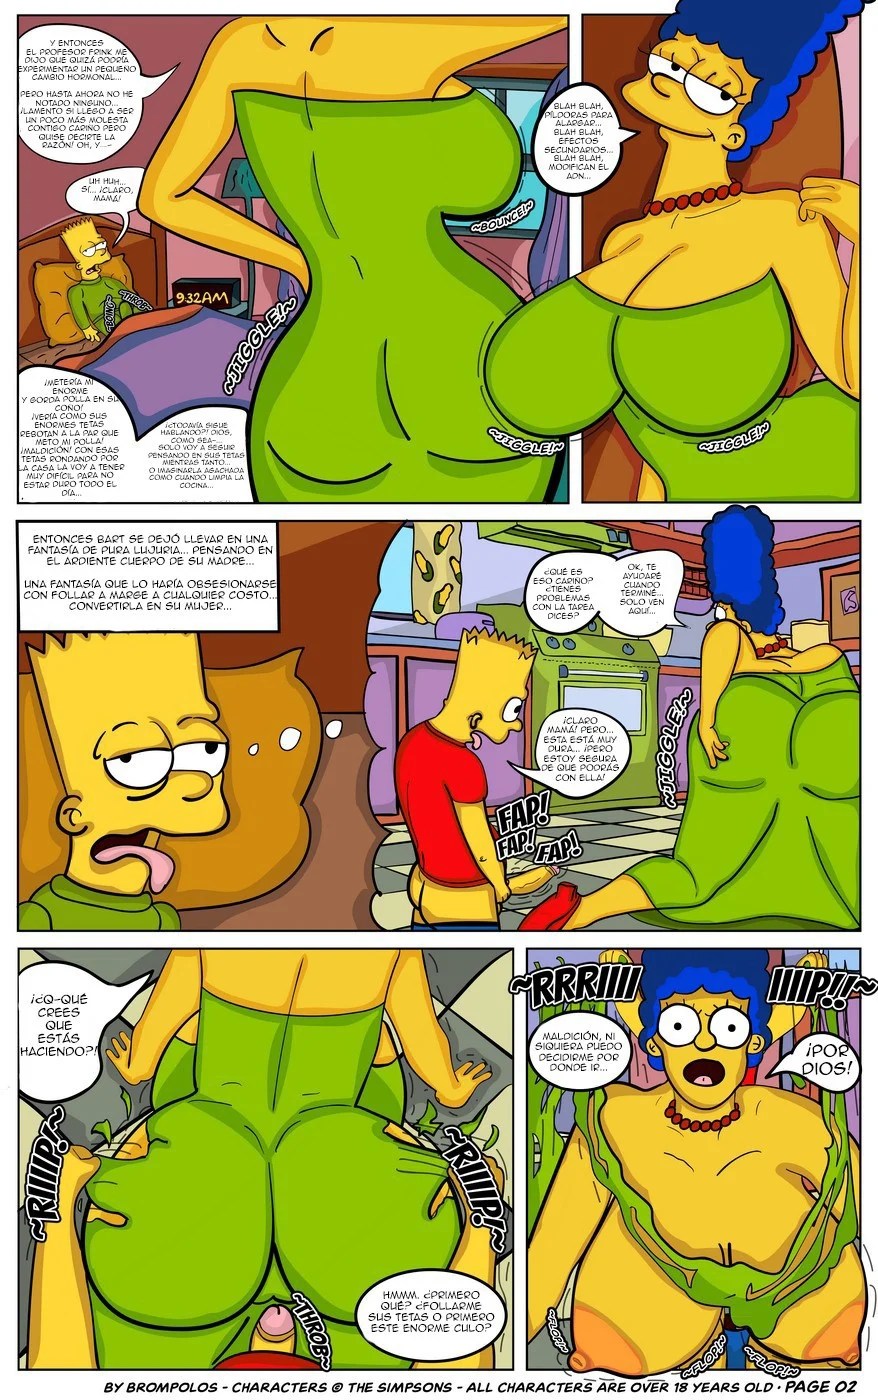 The Simpsons are The Sexenteins - 5a95500dac3d1c36a40babb9806634c4